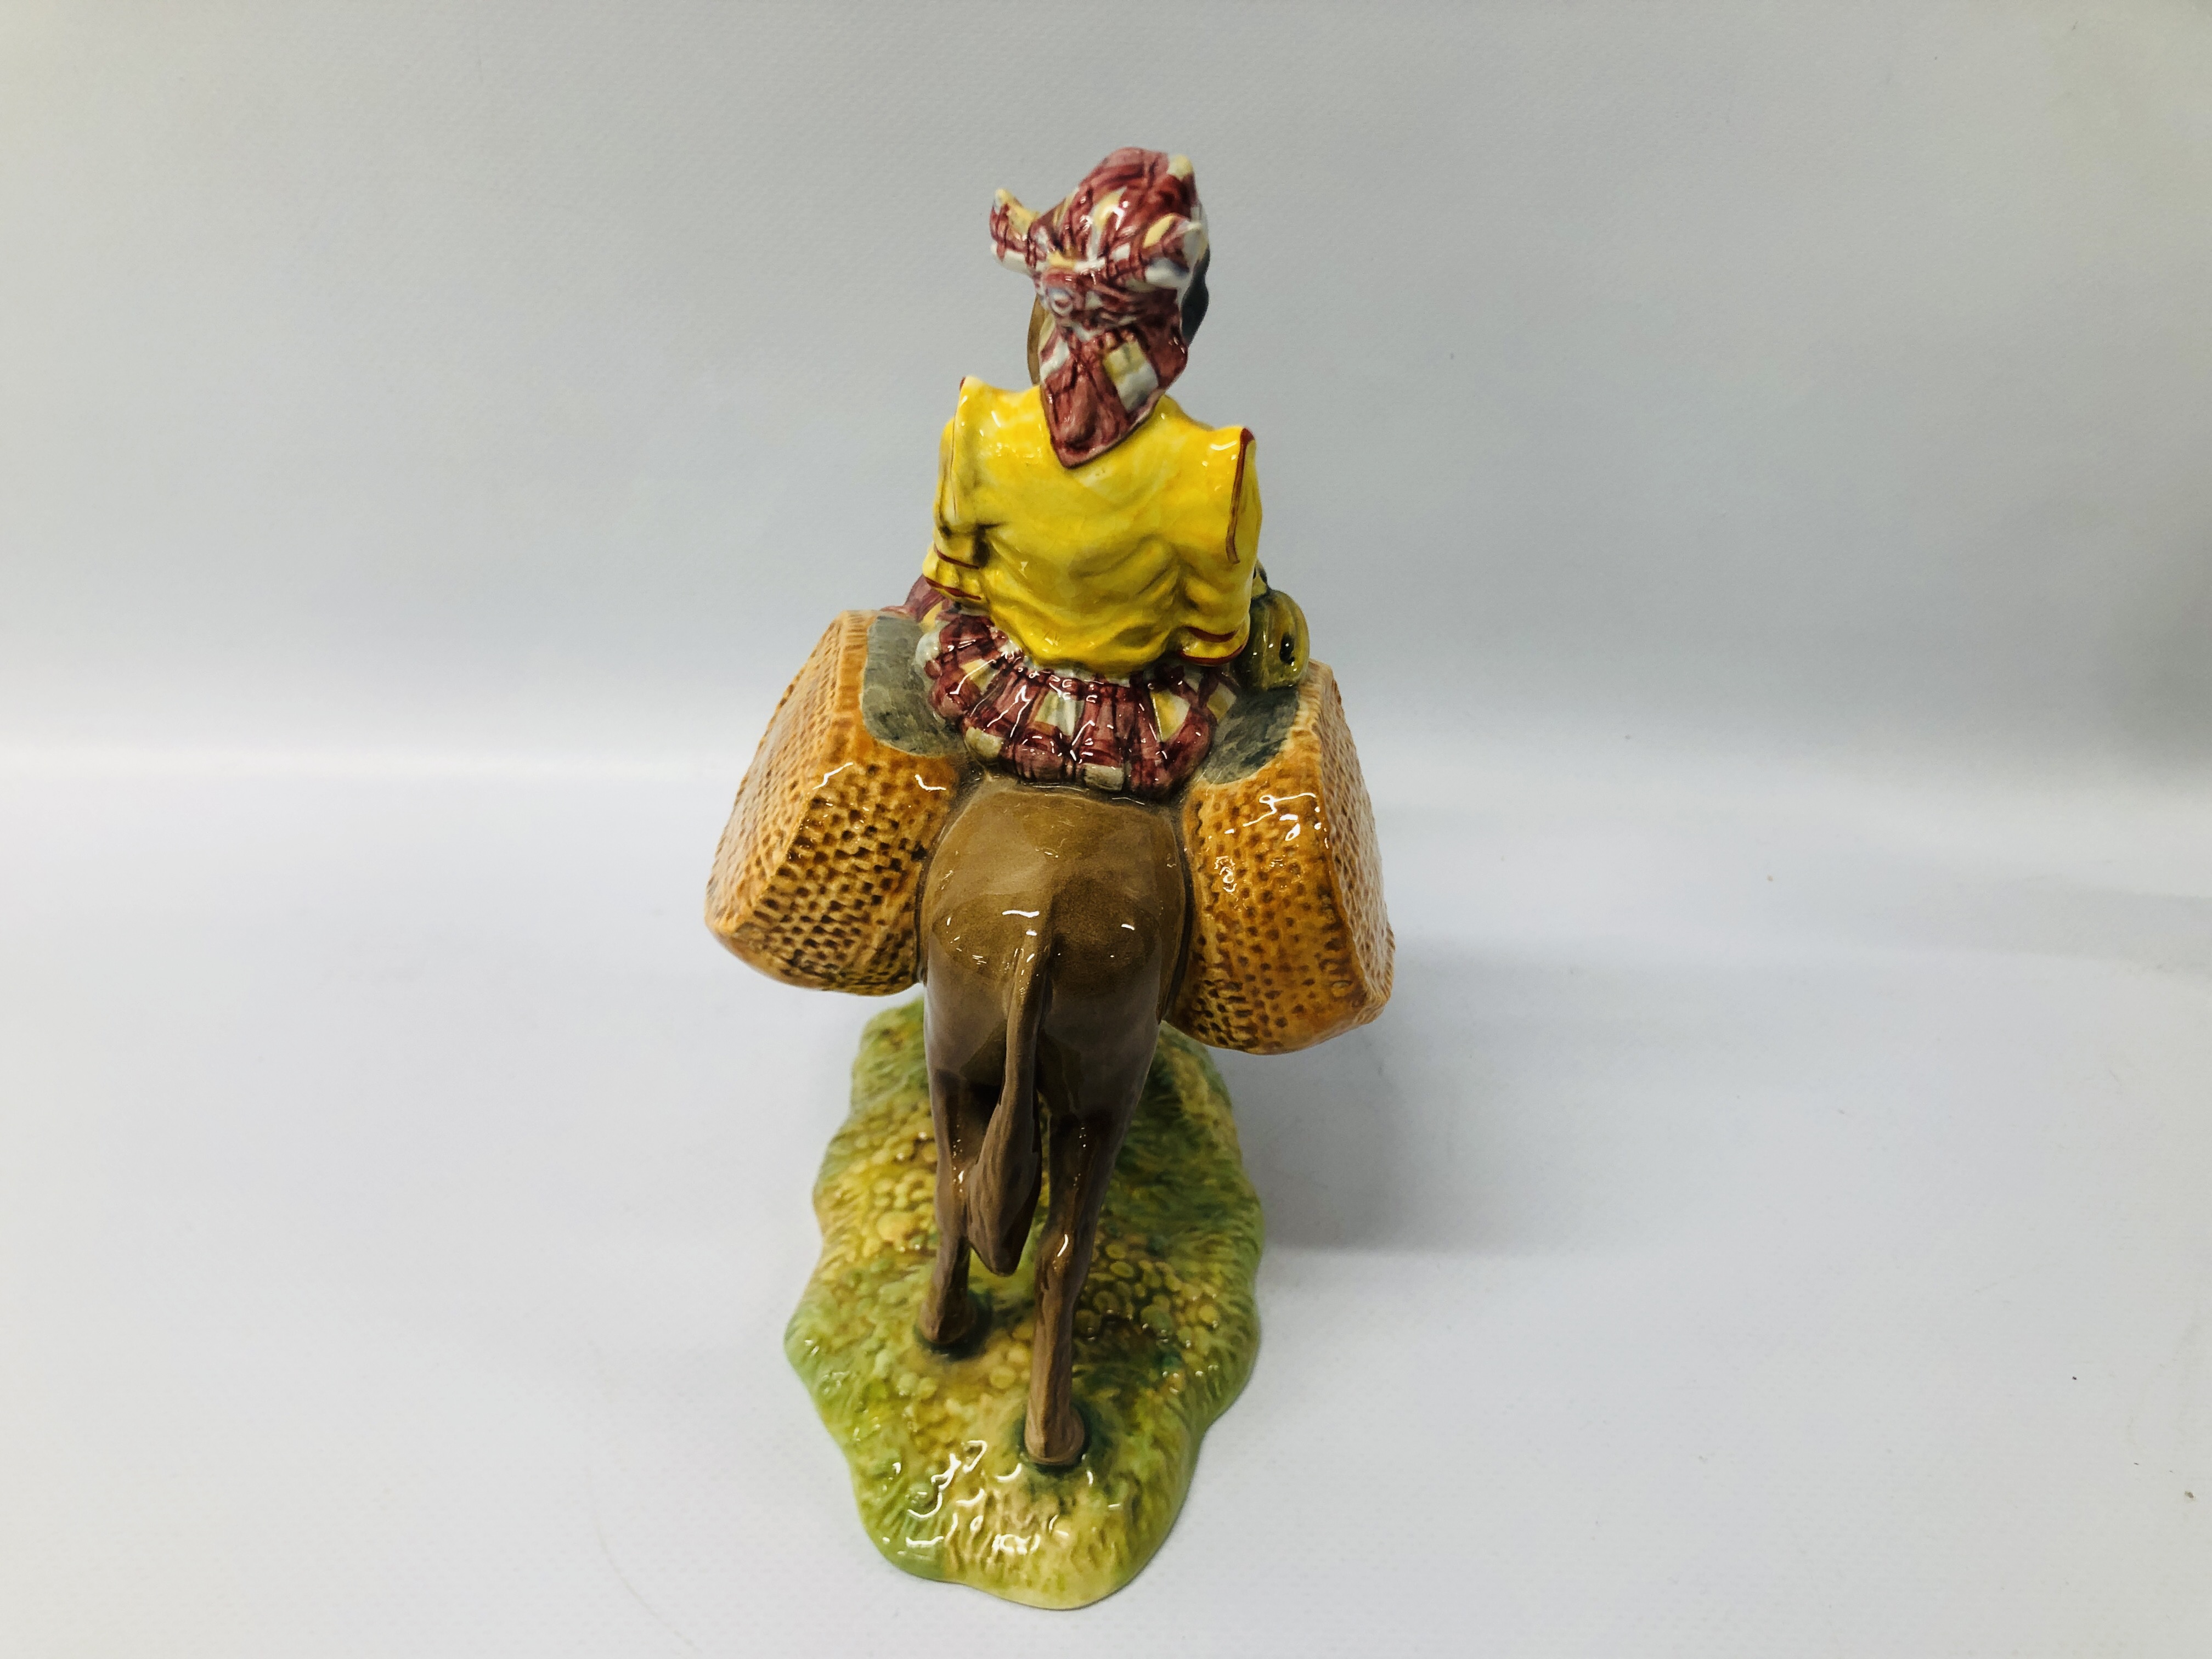 BESWICK "SUSIE JAMAICA" FIGURE ALONG WITH A MINIATURE BESWICK BENEAGLES WHISKY DECANTER (EMPTY) - Image 12 of 13